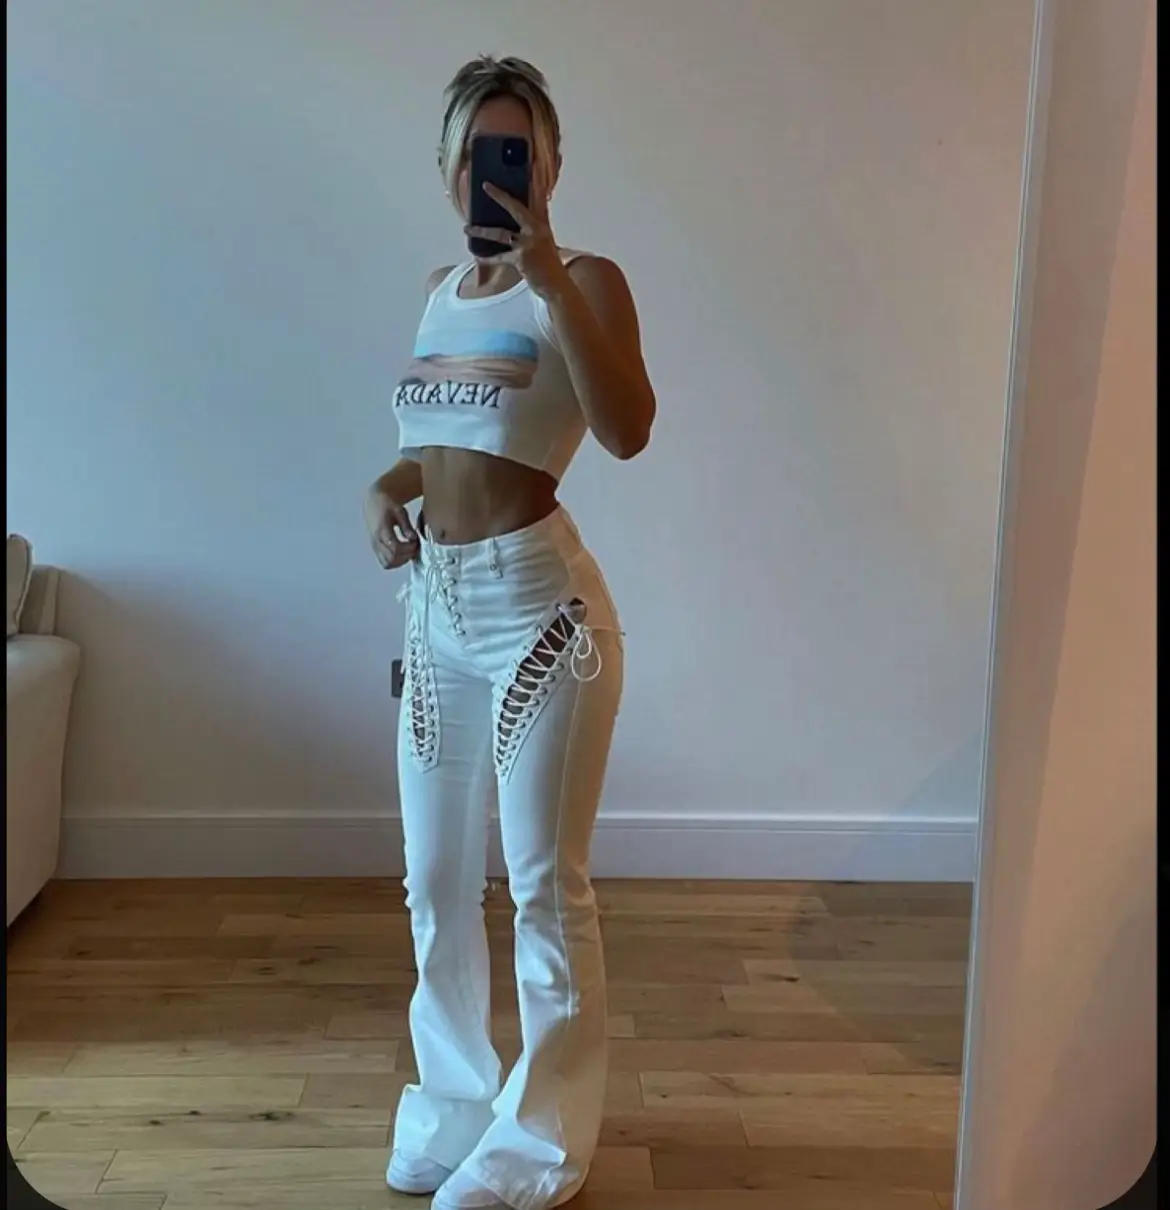  A woman in white pants and a white top is taking a selfie.